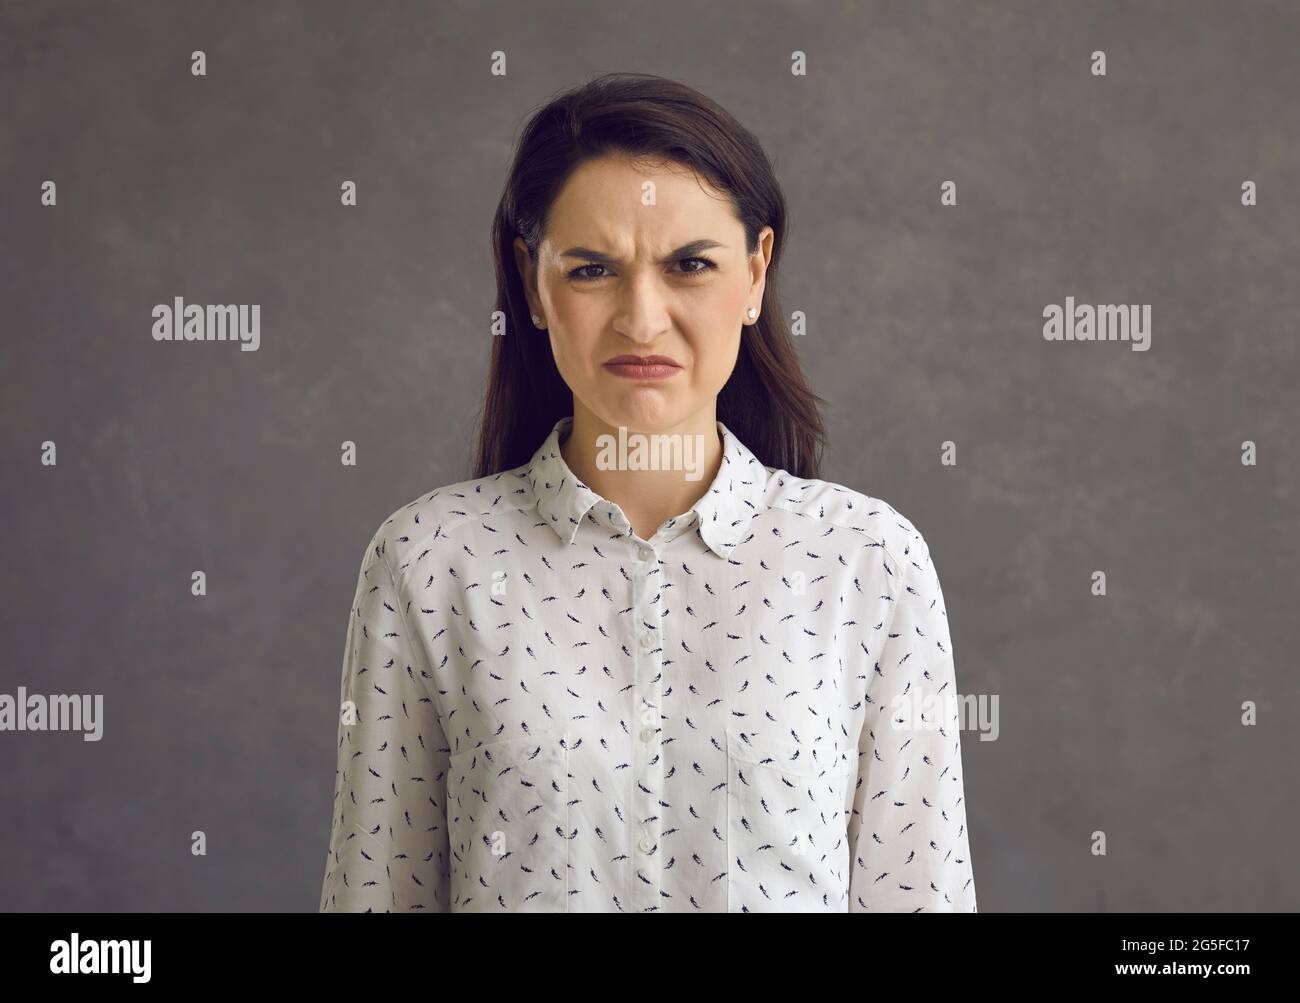 Portrait of an emotional young woman with a frowning grimace who expresses her disgust and dislike. Stock Photo